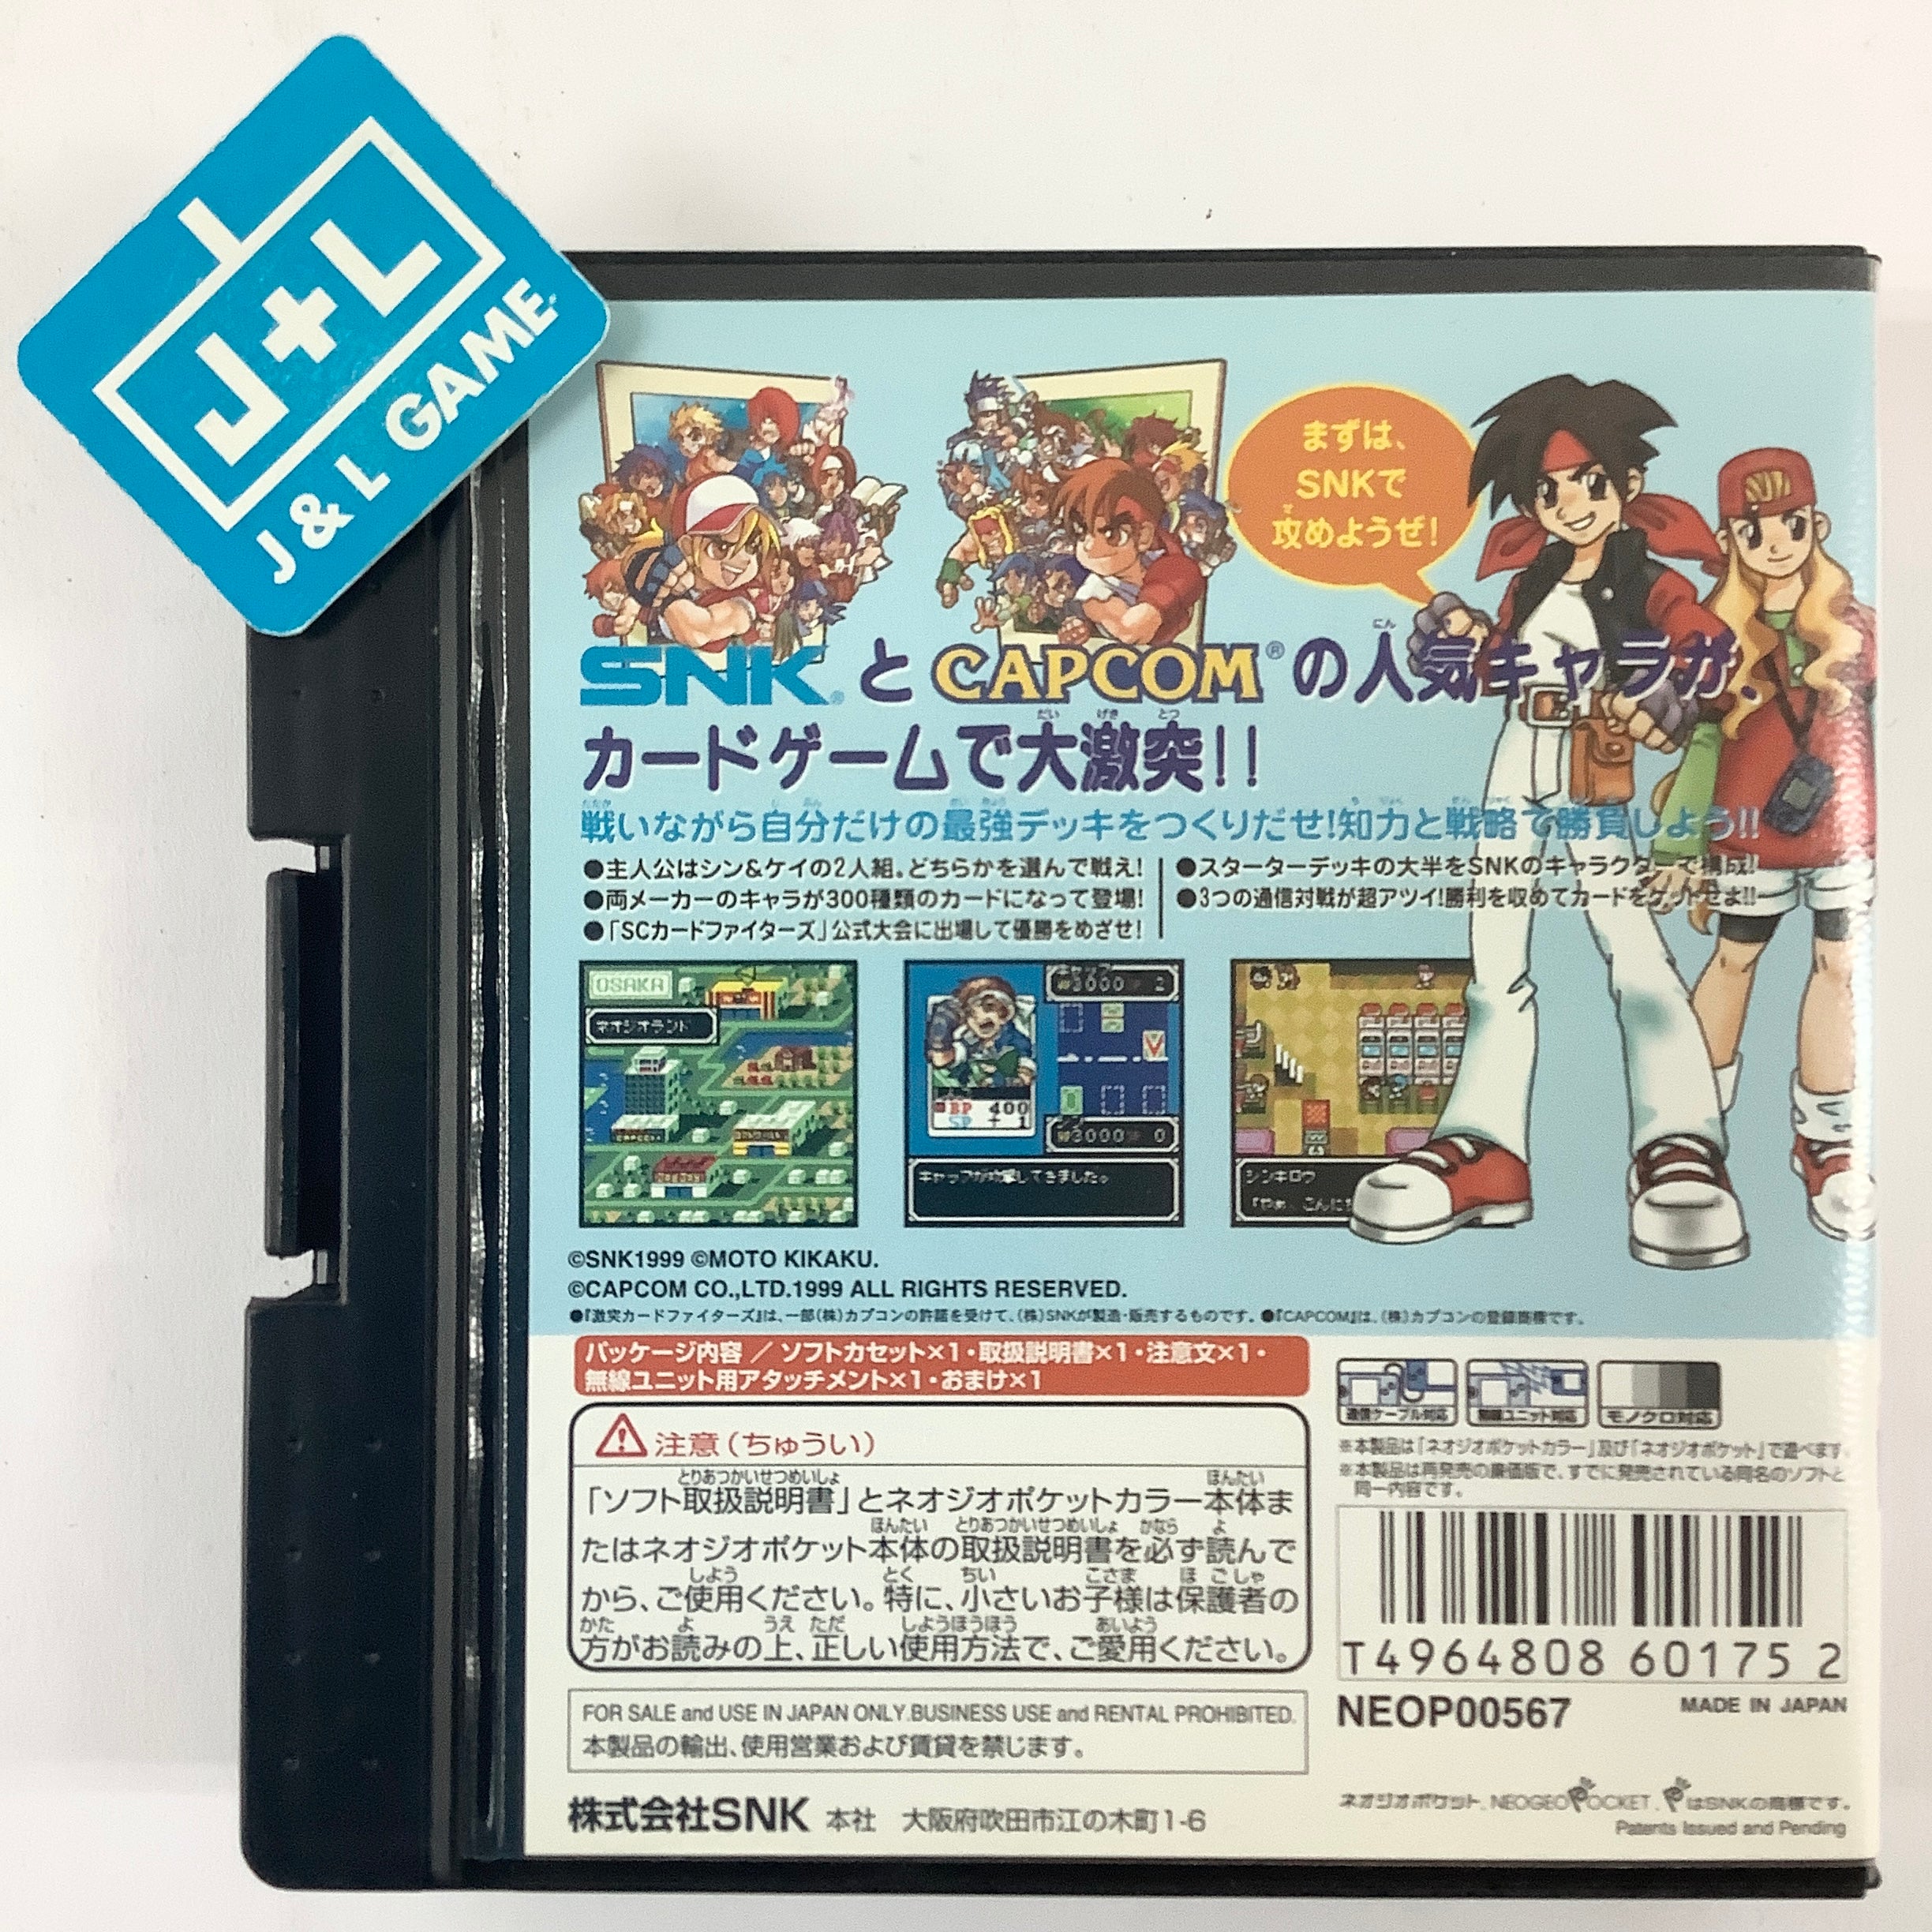 SNK vs. Capcom: Card Fighter's Clash (SNK Version) (Best Collection) - (NGPC) SNK NeoGeo Pocket Color [Pre-Owned] (Japanese Import) Video Games SNK   